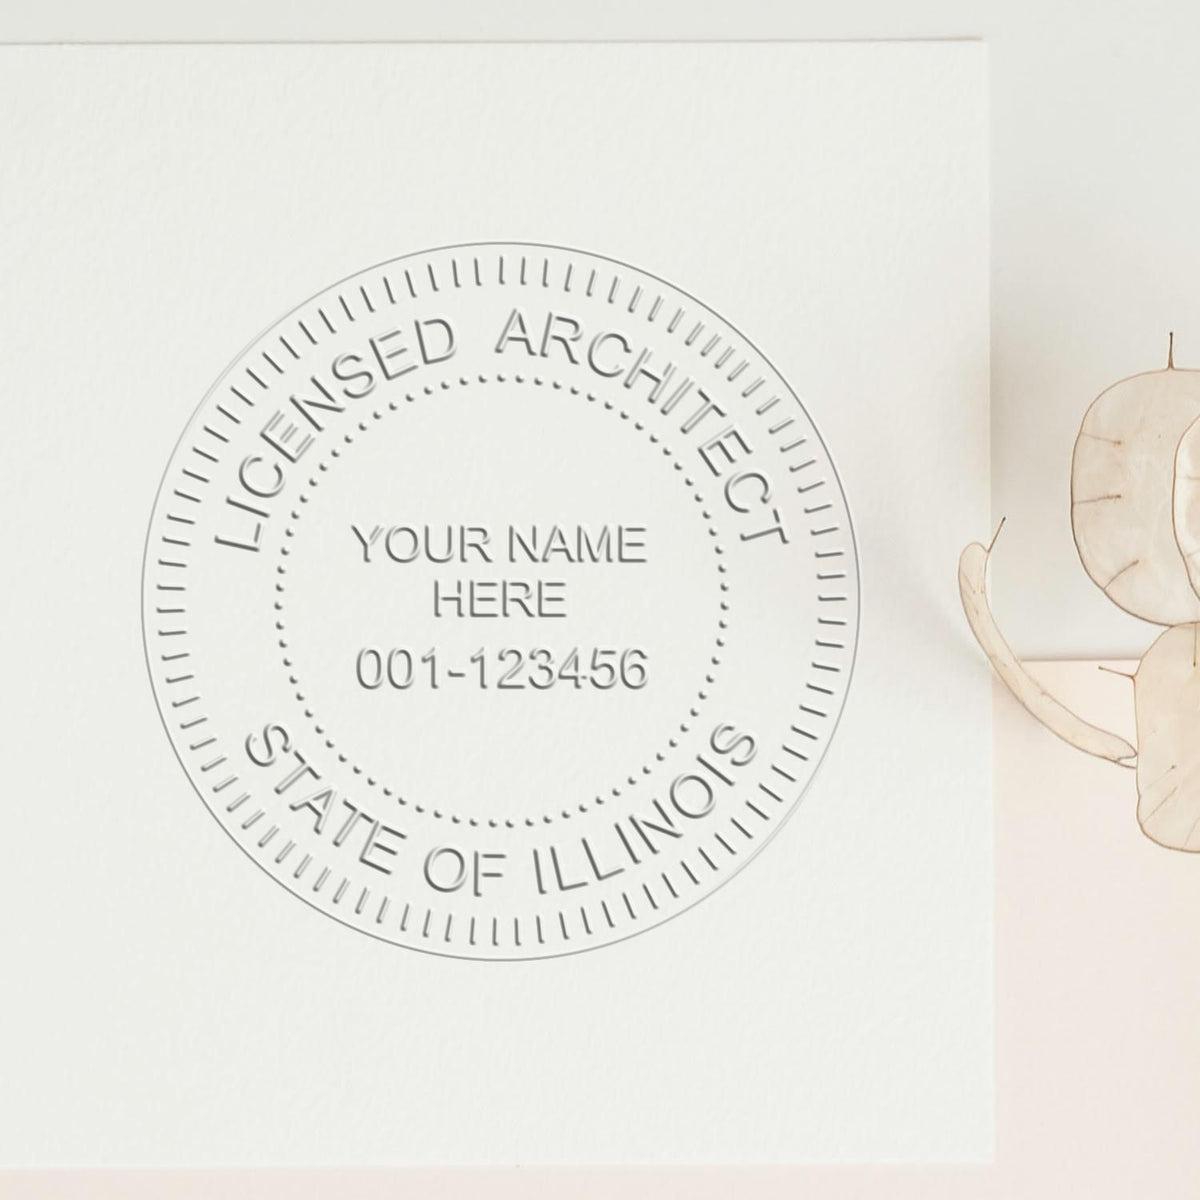 The State of Illinois Architectural Seal Embosser stamp impression comes to life with a crisp, detailed photo on paper - showcasing true professional quality.